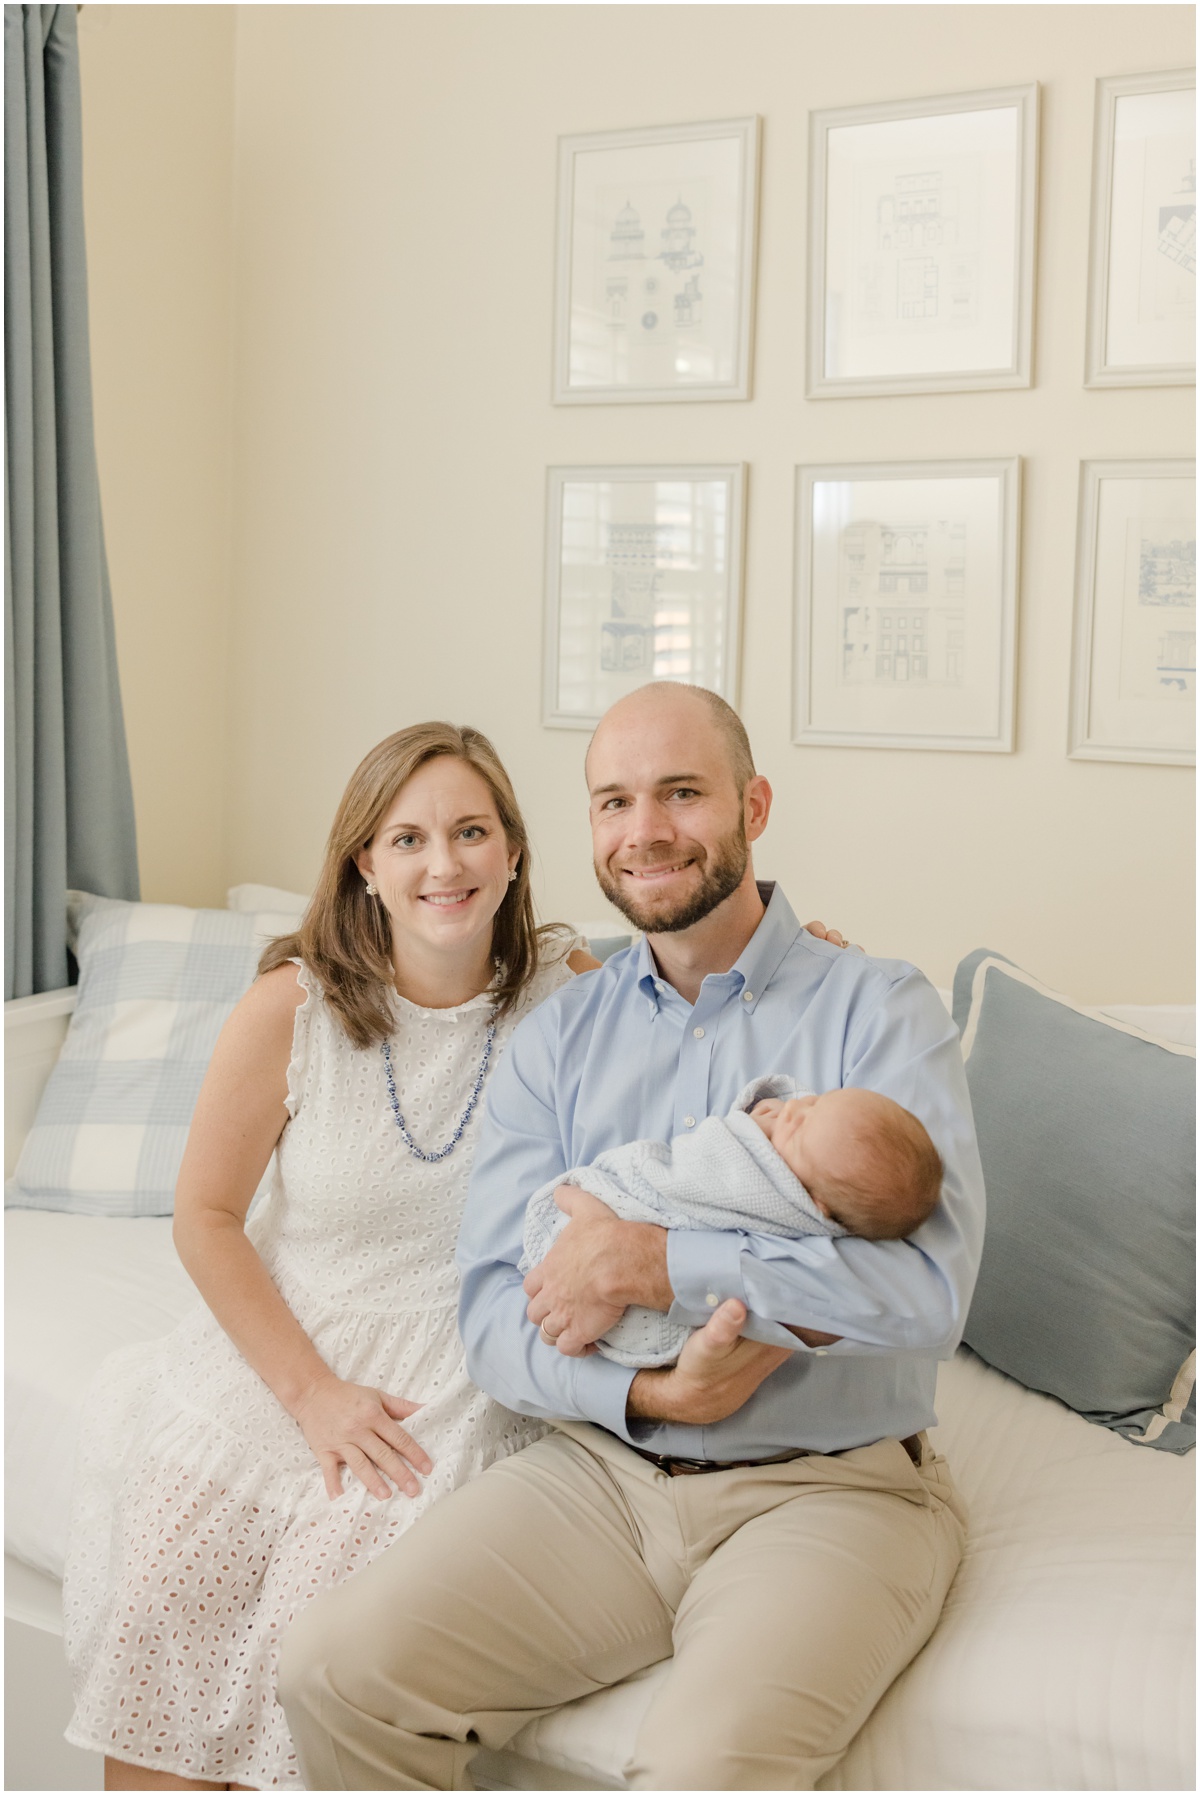 Greenville Newborn Photography of parents seated on a white daybed holding a newborn boy wrapped in a blue blanket.